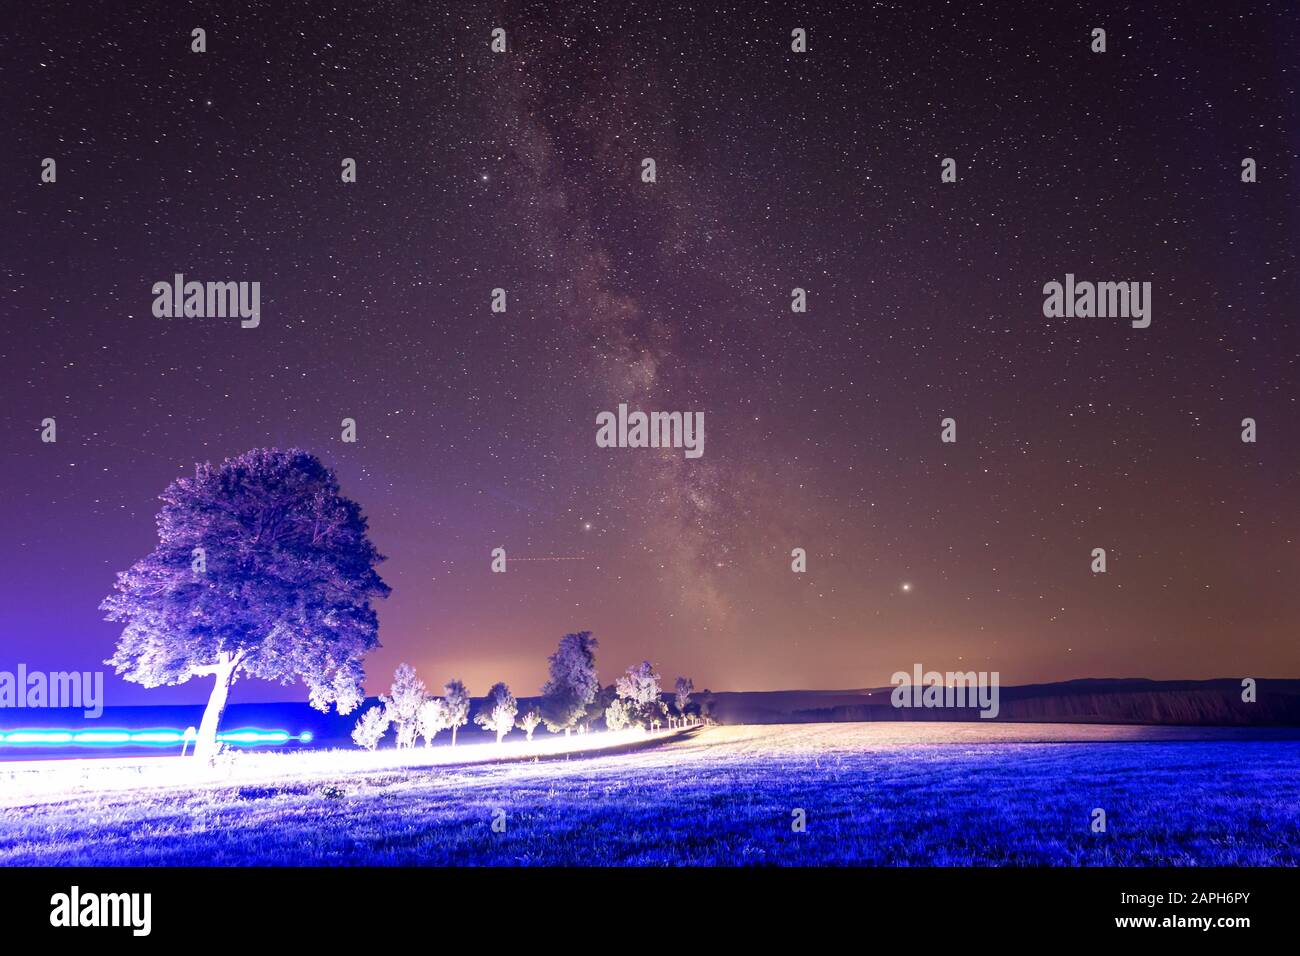 Milky way and starry sky with illumination from the road. Blue street light. Stock Photo